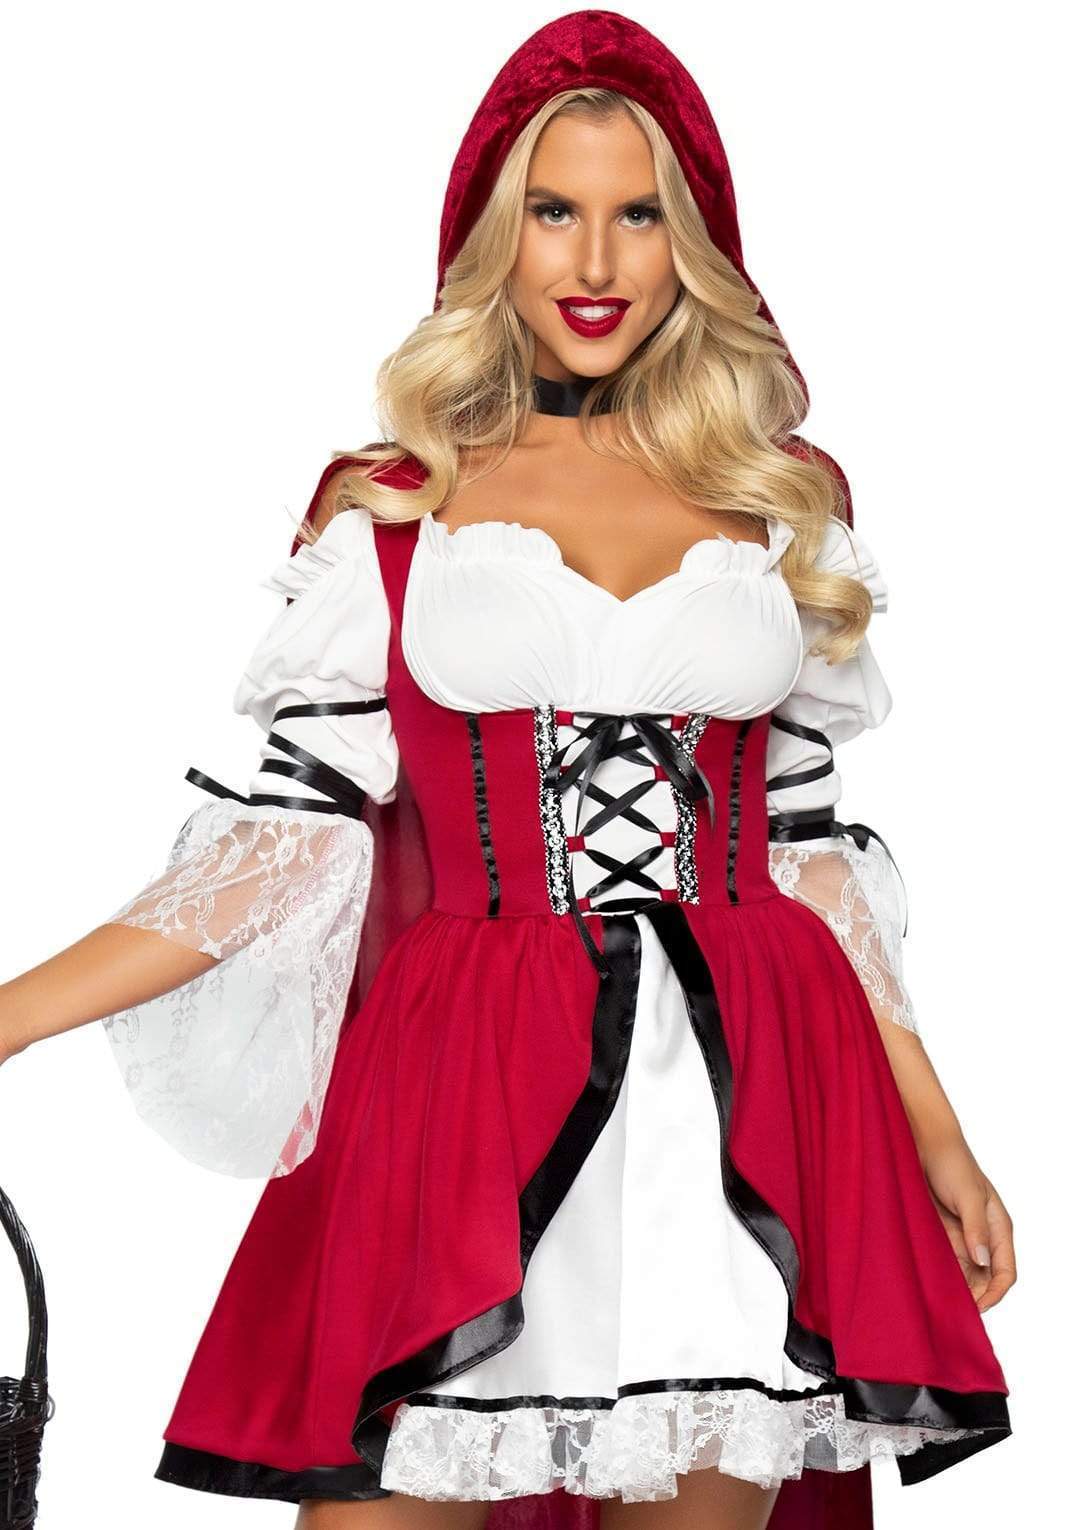 Storybook Red Riding Hood Lace Trimmed Peasant Dress and Attached Cape